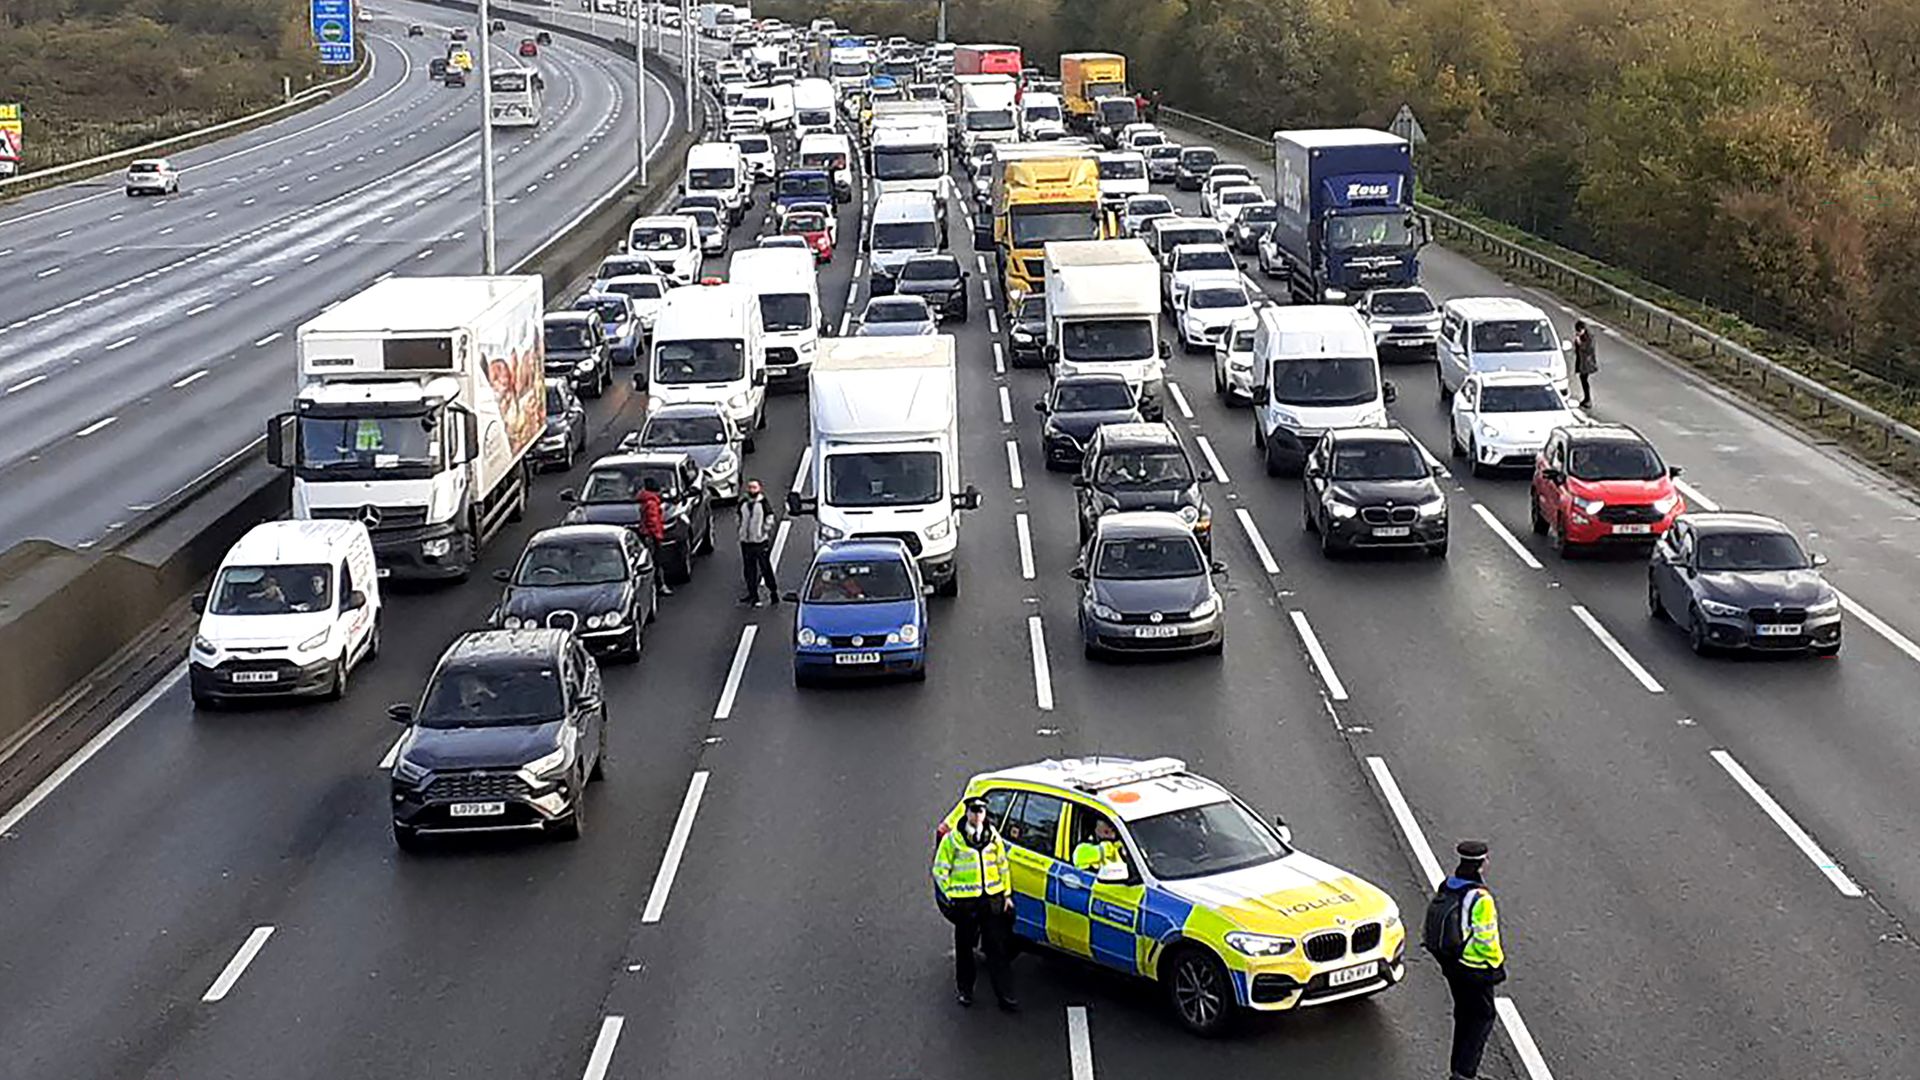 Five 'fanatic' Just Stop Oil protesters jailed for plot to block M25